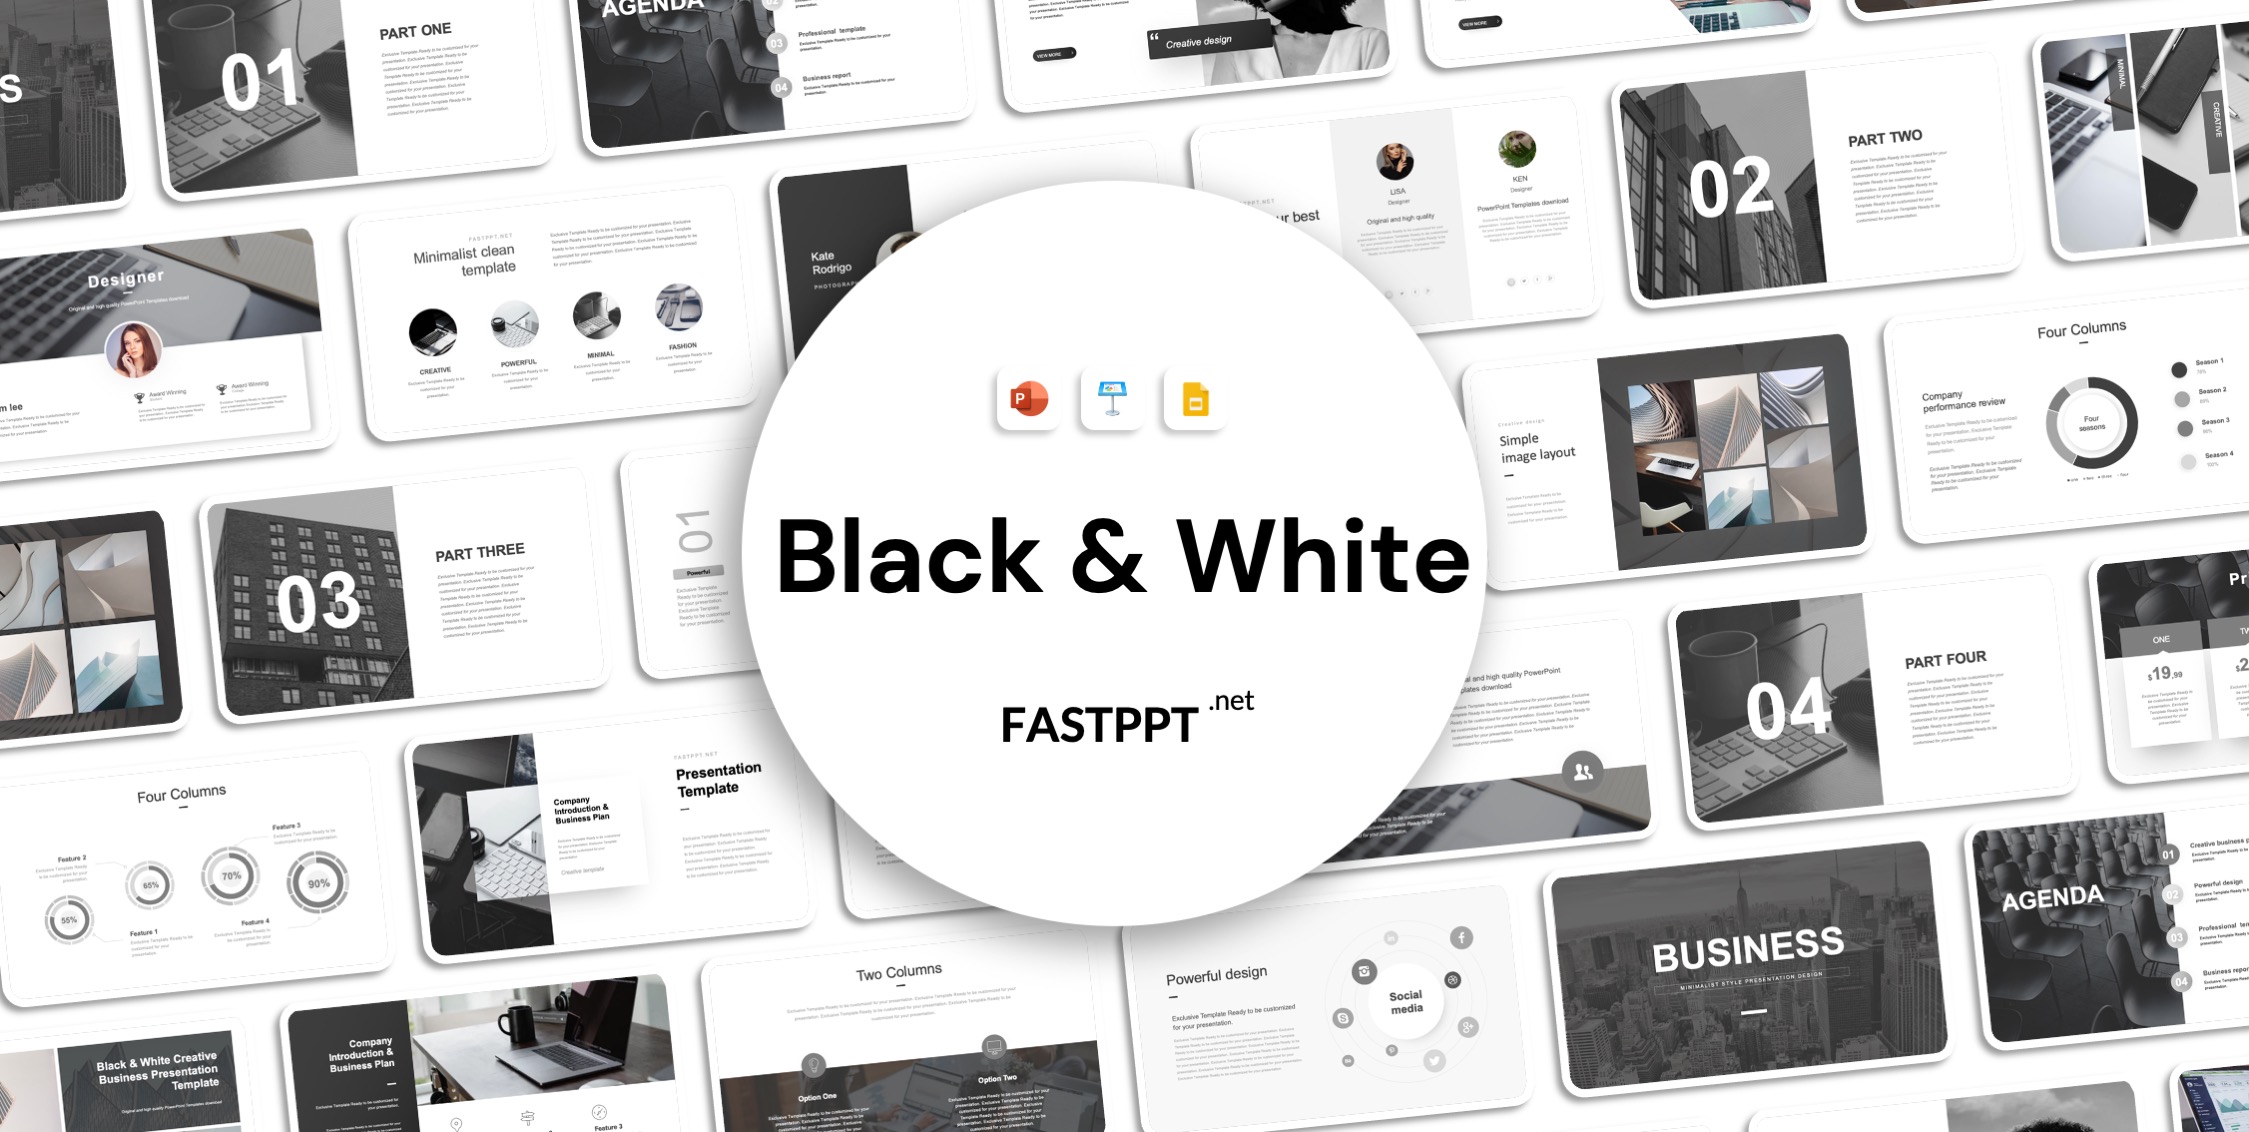 Best Black & White PowerPoint Templates to Nail Your Next Pitch